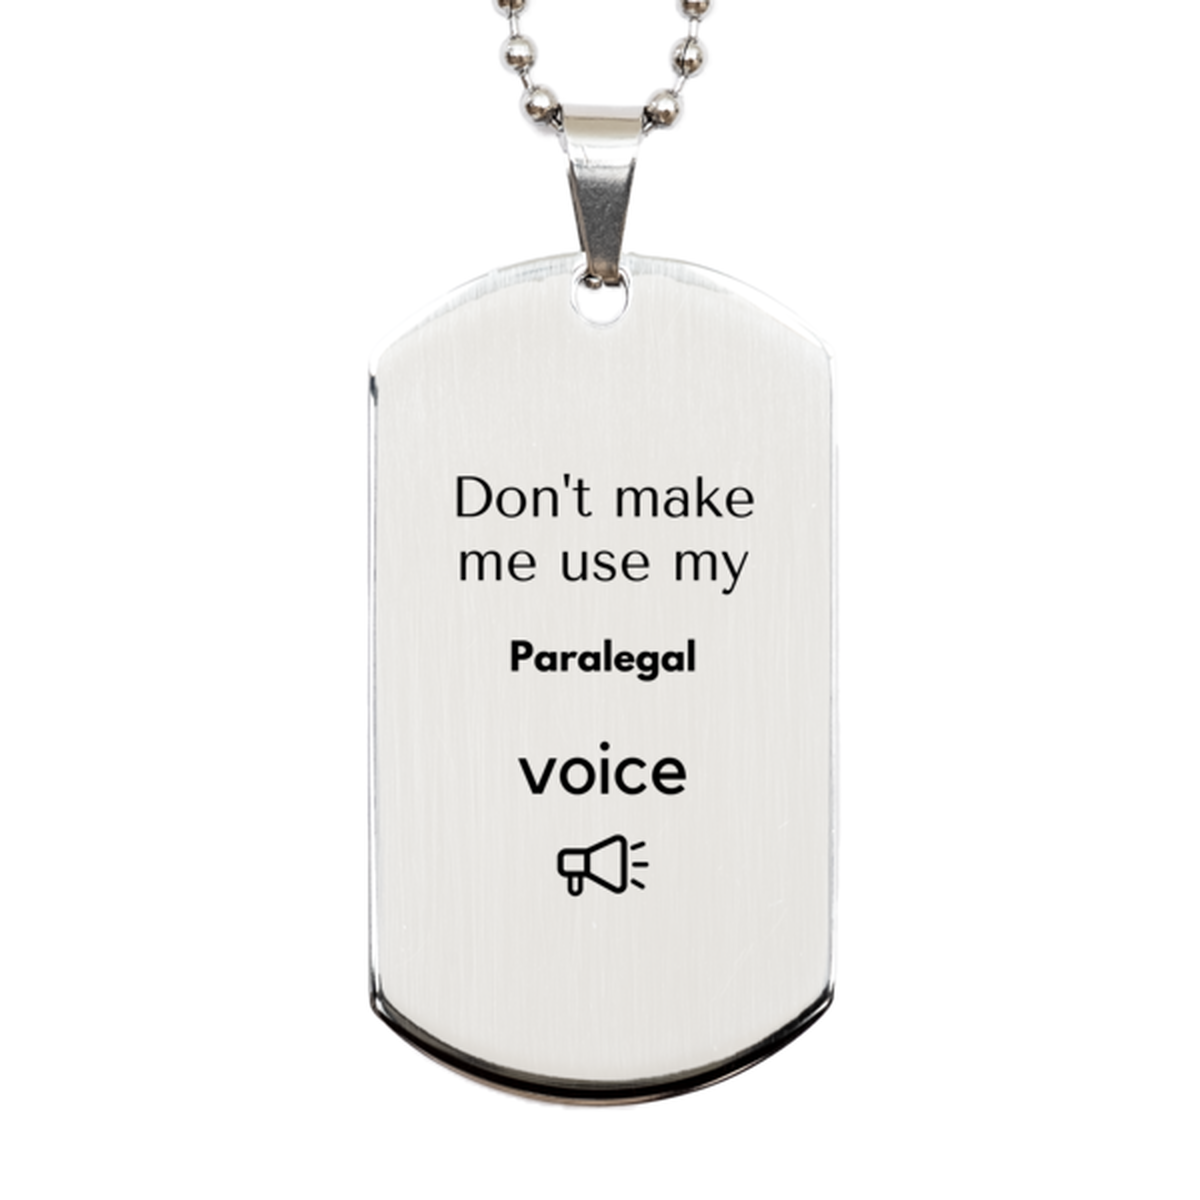 Don't make me use my Paralegal voice, Sarcasm Paralegal Gifts, Christmas Paralegal Silver Dog Tag Birthday Unique Gifts For Paralegal Coworkers, Men, Women, Colleague, Friends